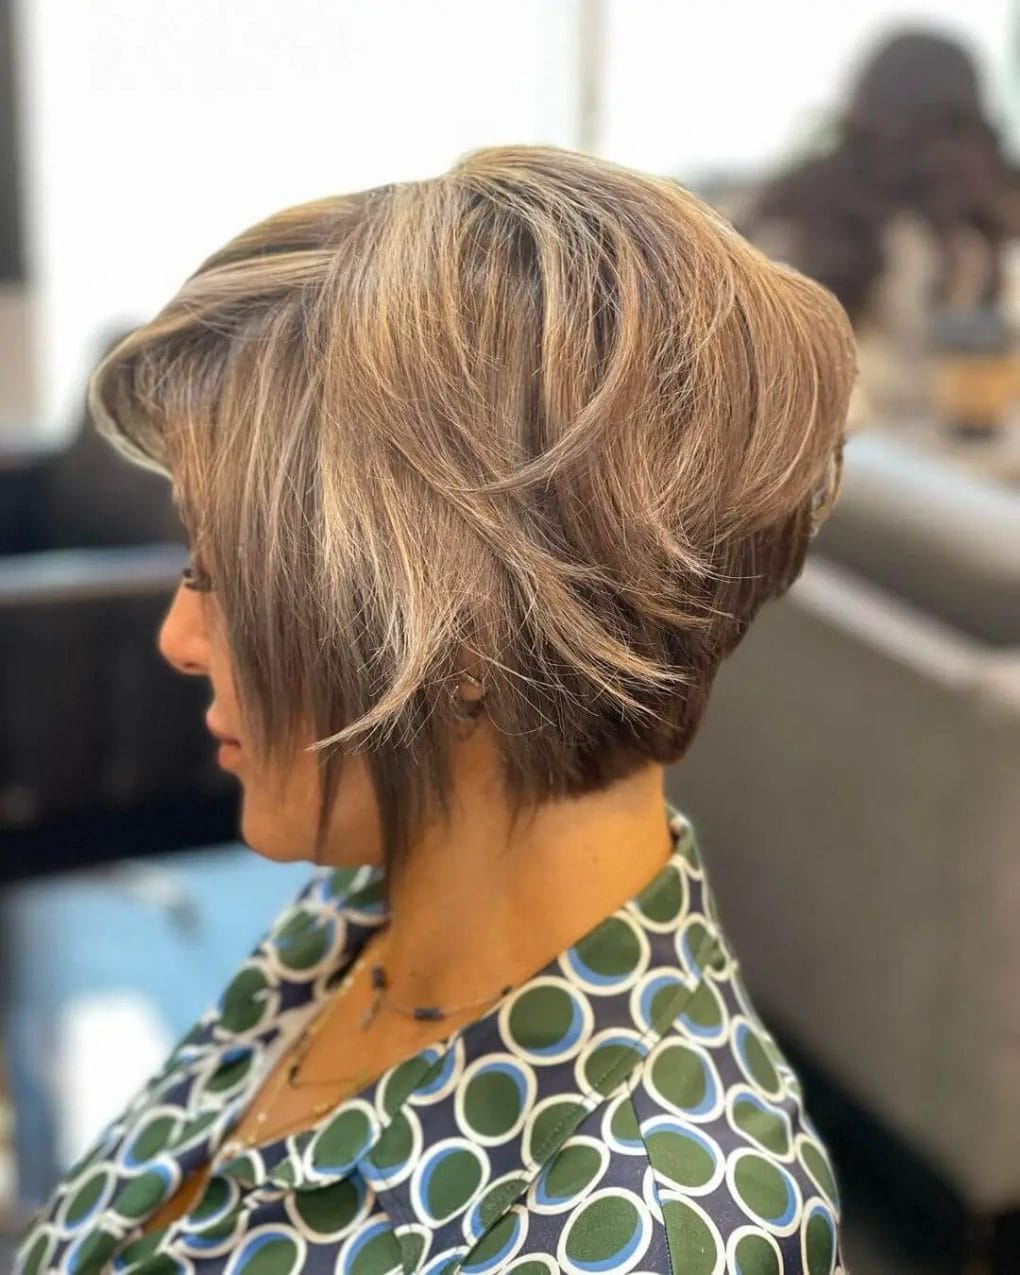 Ash blonde and brown textured pixie with youthful volume.